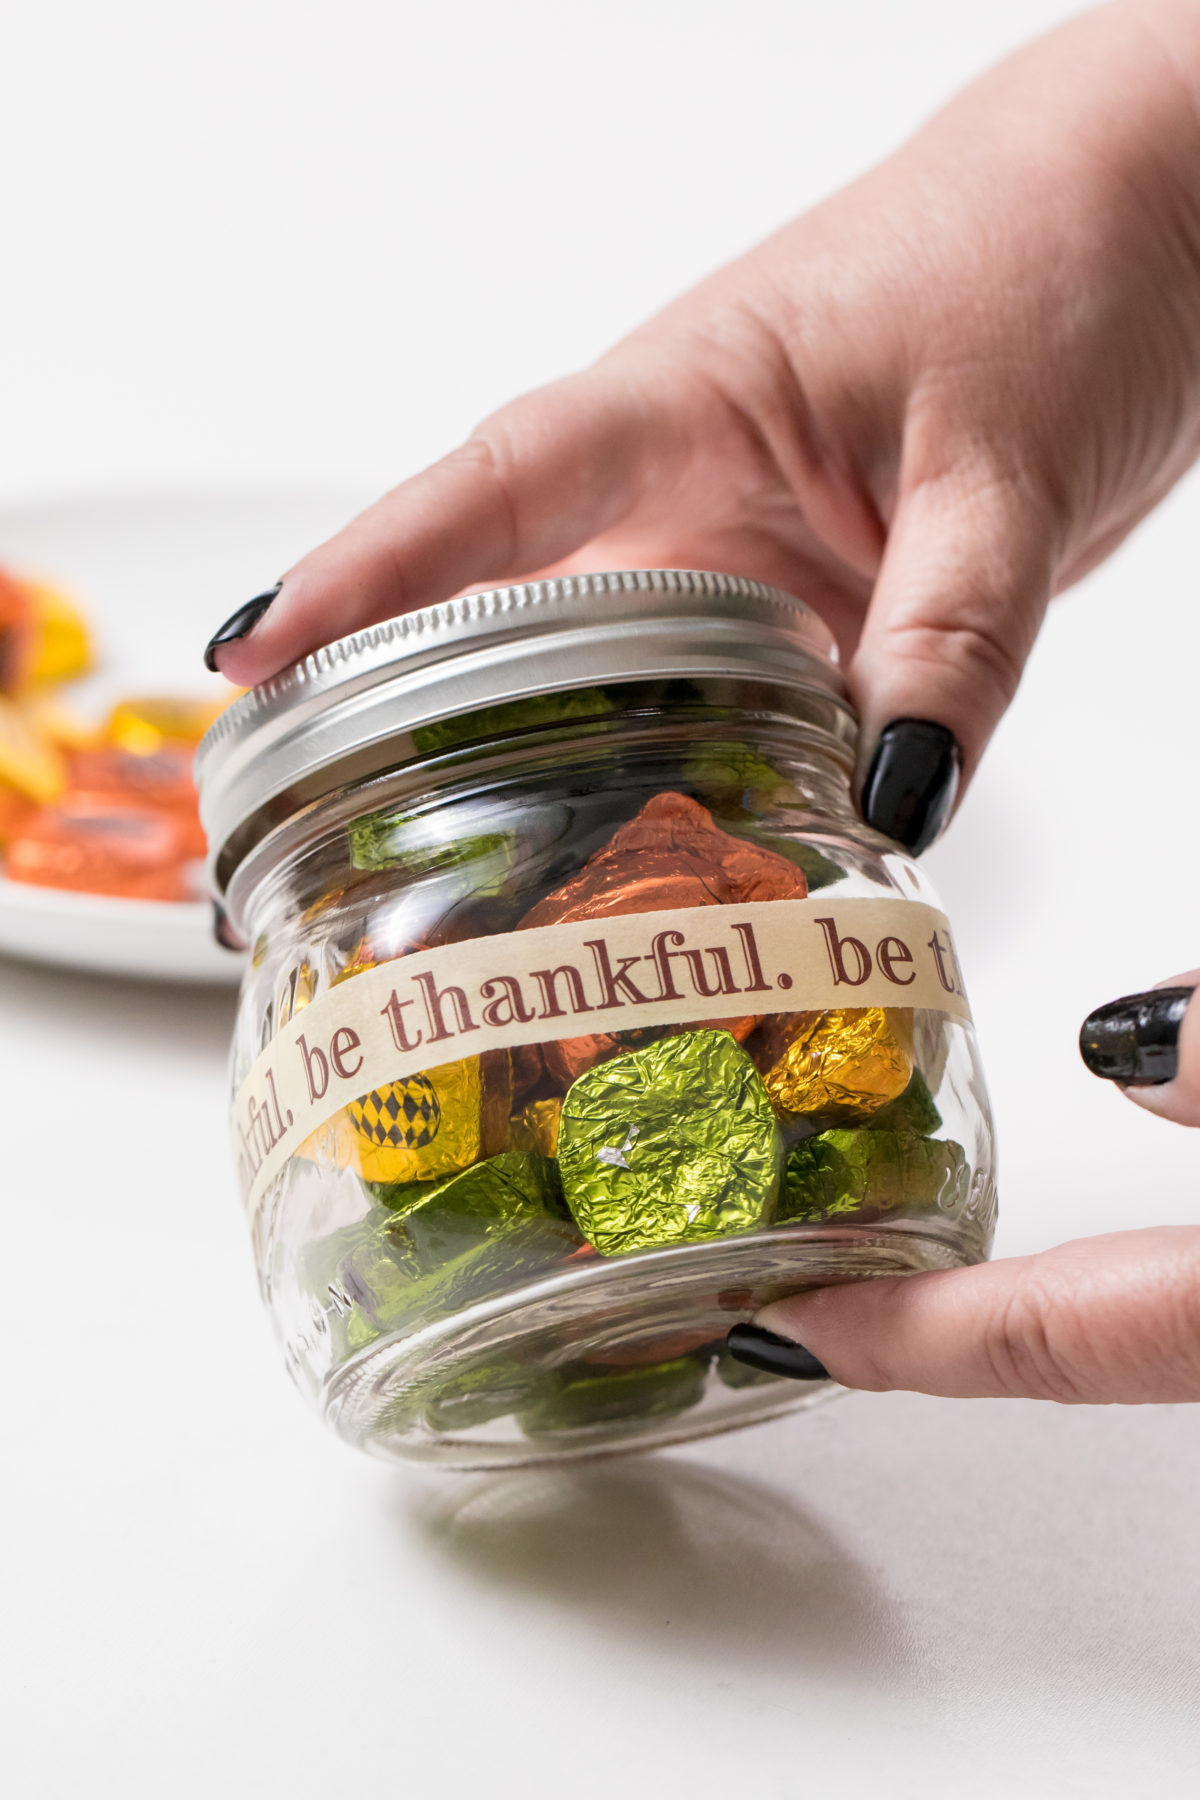 5D4B4659 - Thanksgiving Candy Jars - Prepare the project